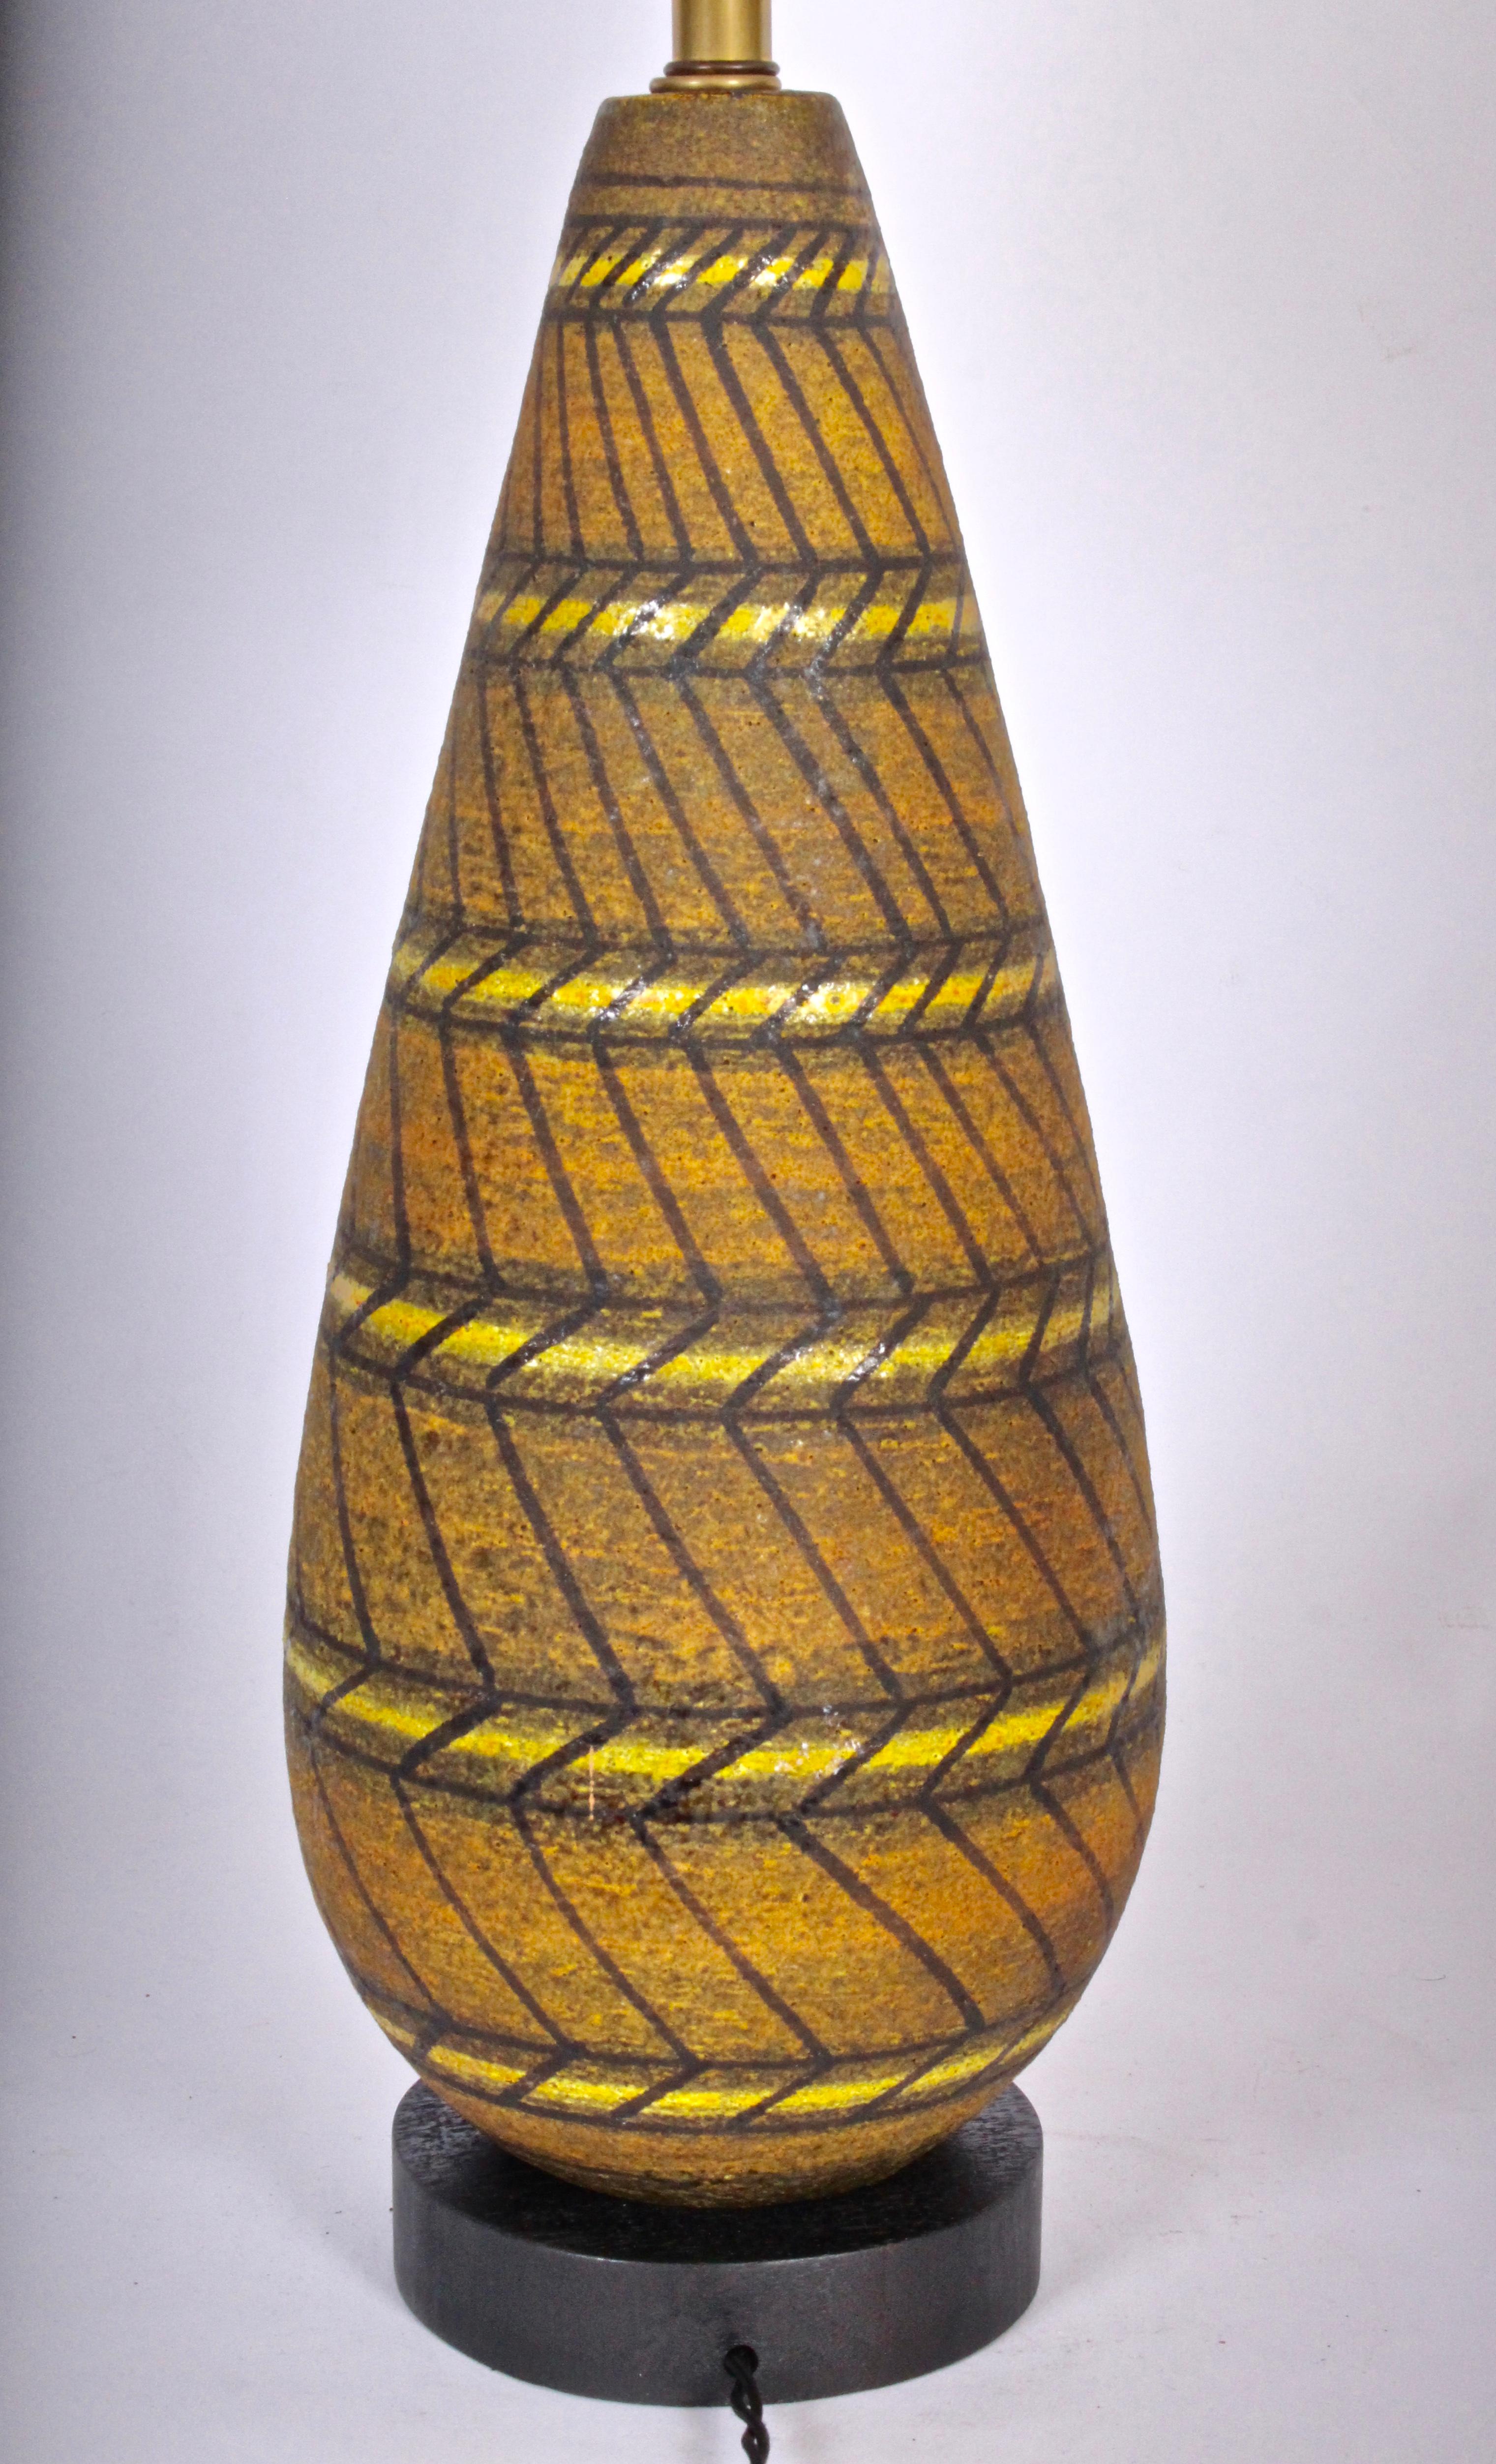 Italian Aldo Londi Geometric Cocoa Art Pottery Table Lamp Hand Painted in Yellow, 1950s For Sale